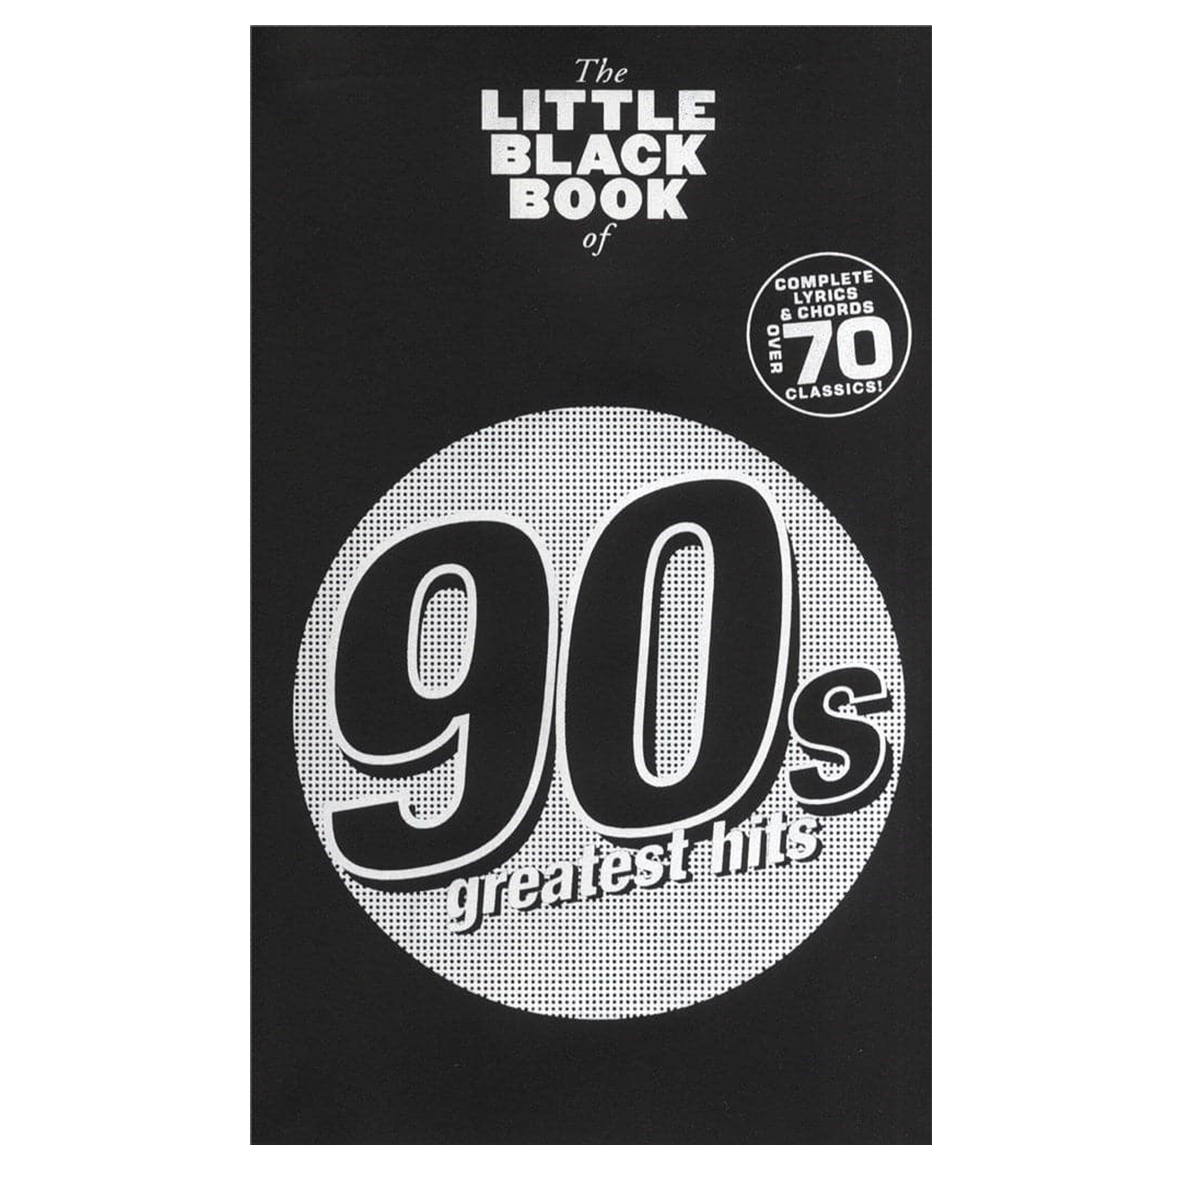 The Little Black Songbook - 90's Greatest Hit's